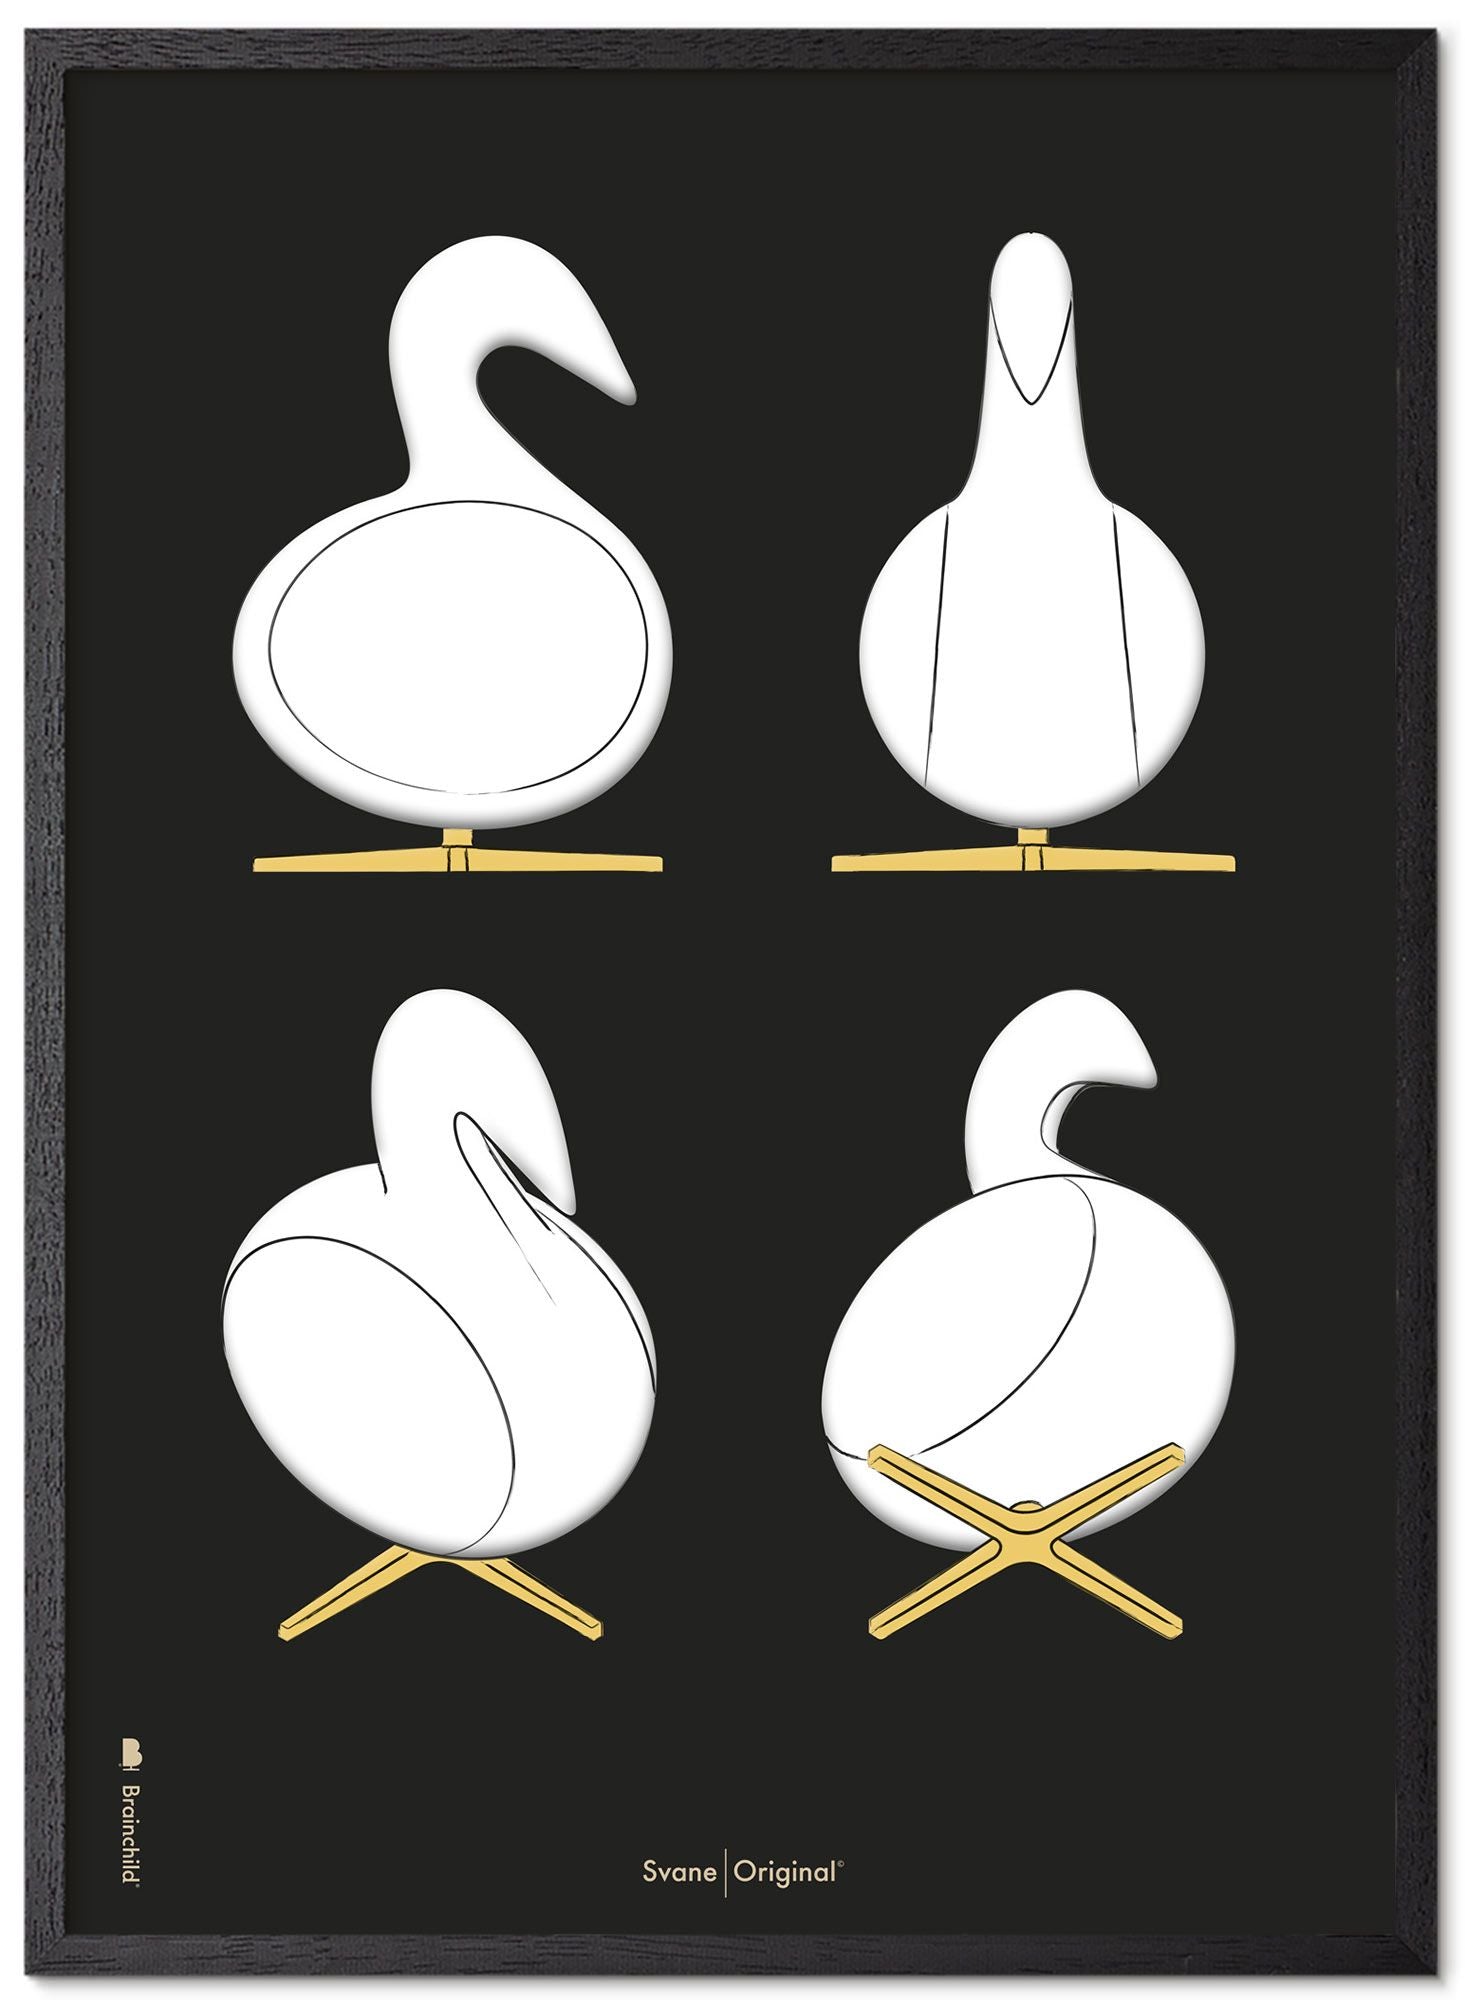 Brainchild Swan Design Sketches Poster Frame Made Of Black Lacquered Wood 50x70 Cm, Black Background